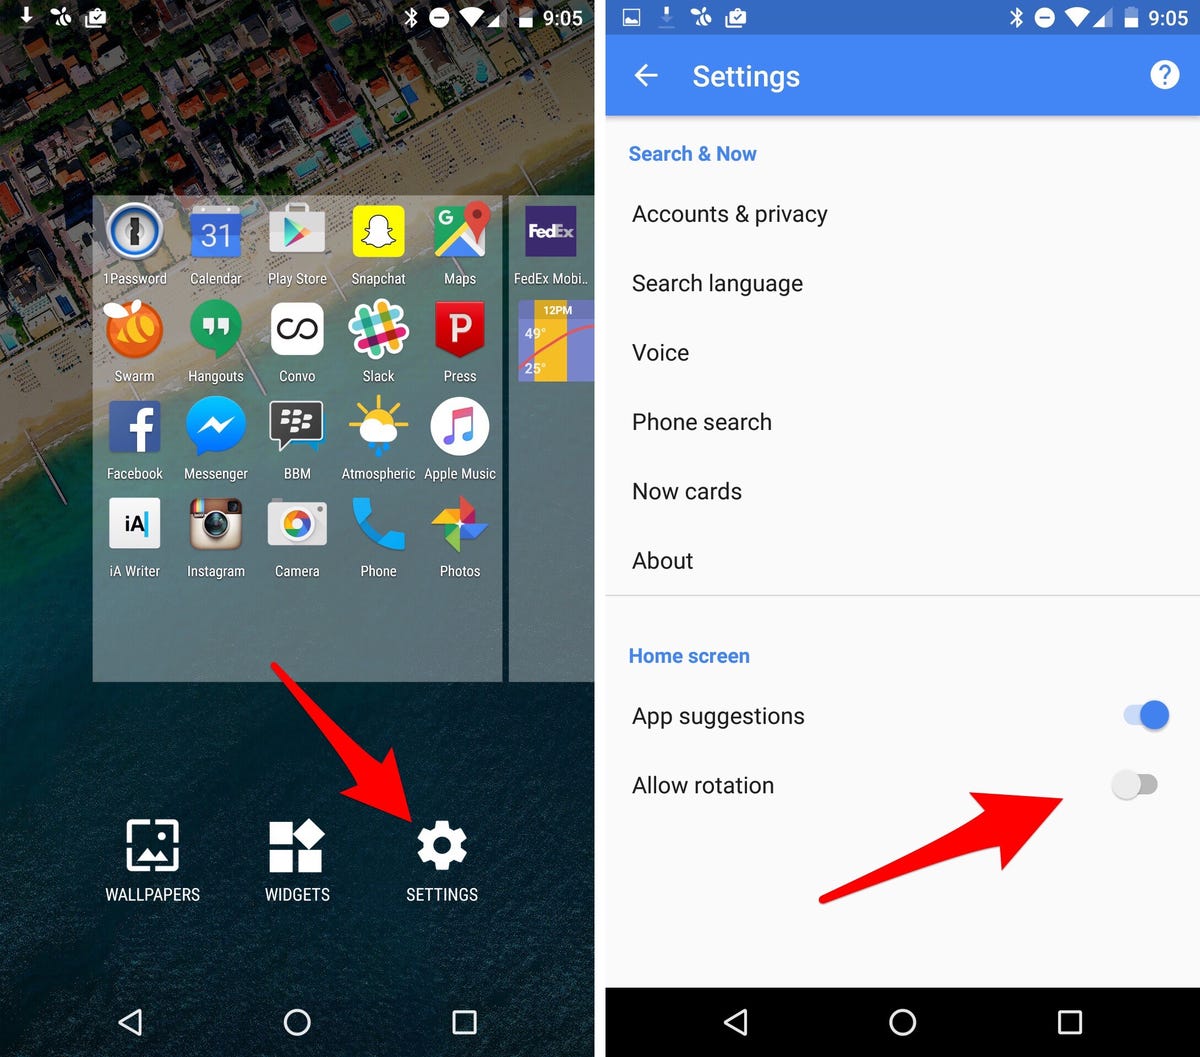 How to enable autorotate on Android